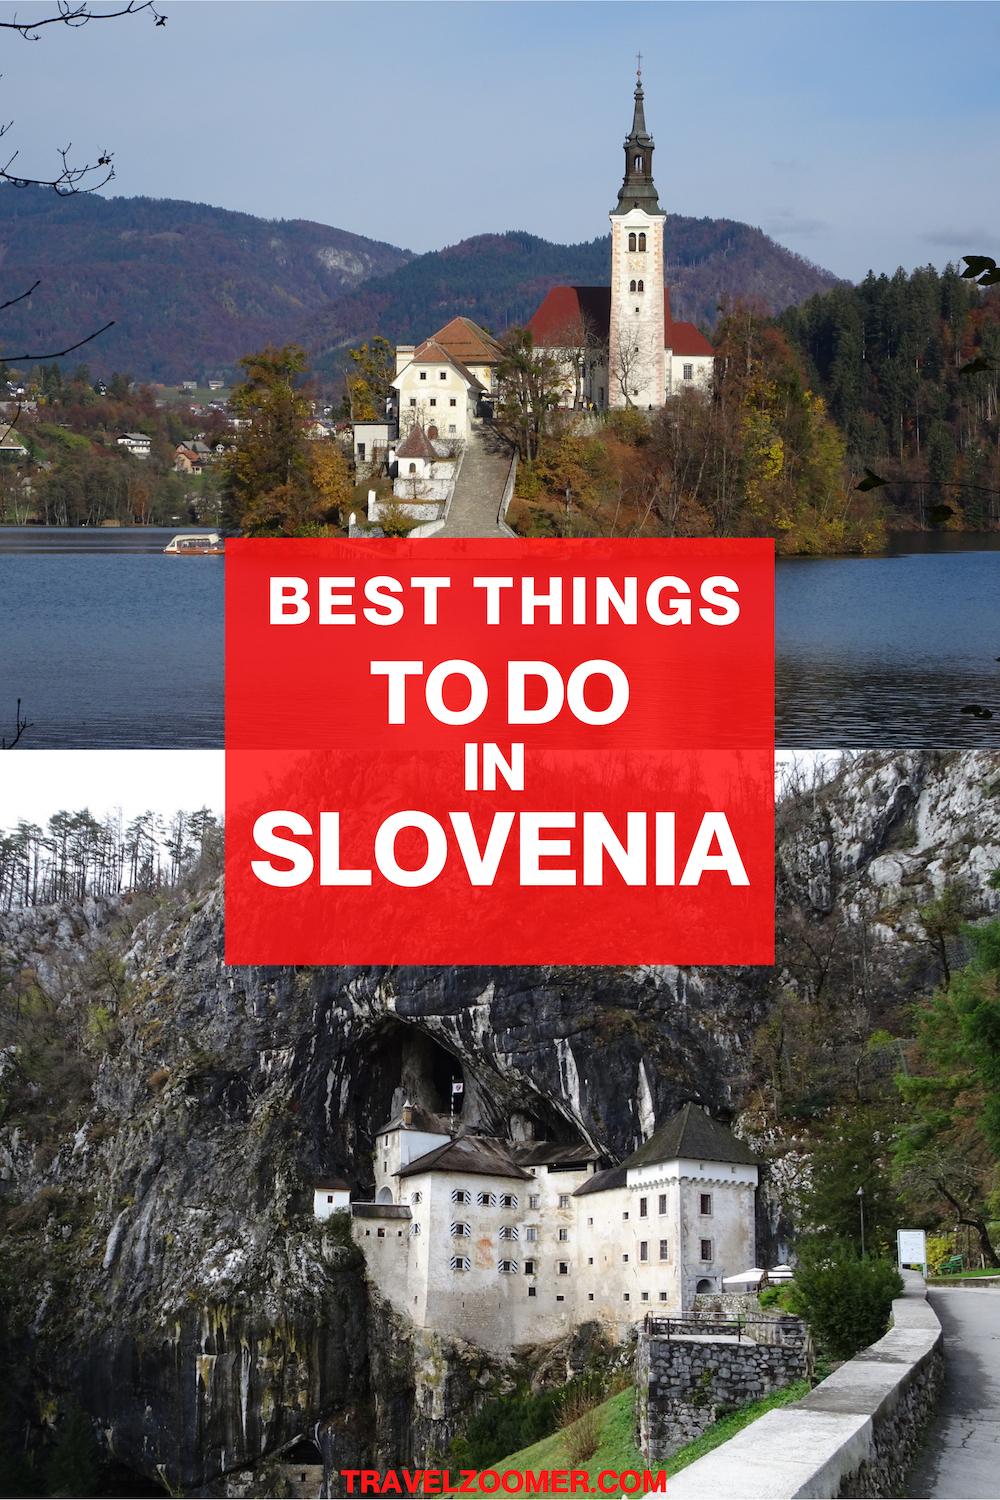 Best Things To Do In Slovenia - Travel Zoomer